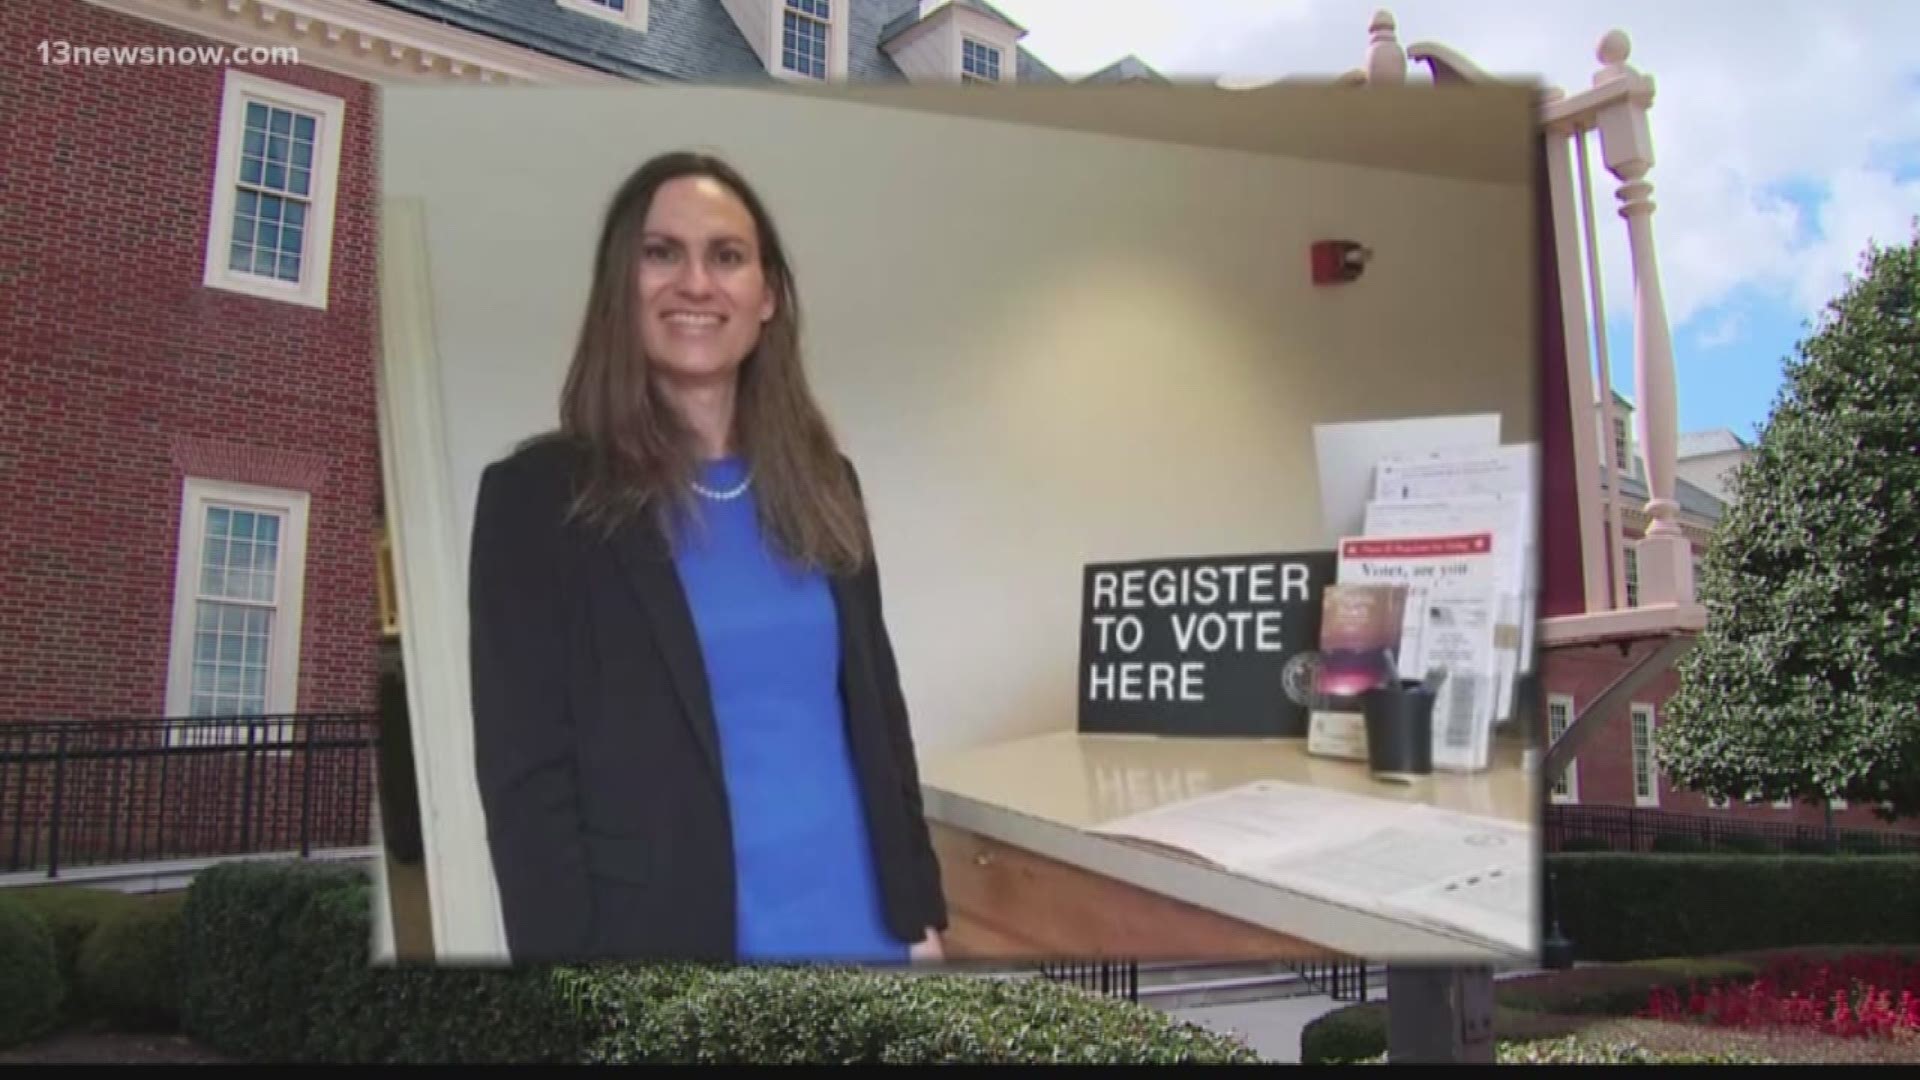 A woman running for city council in Virginia Beach is making history.